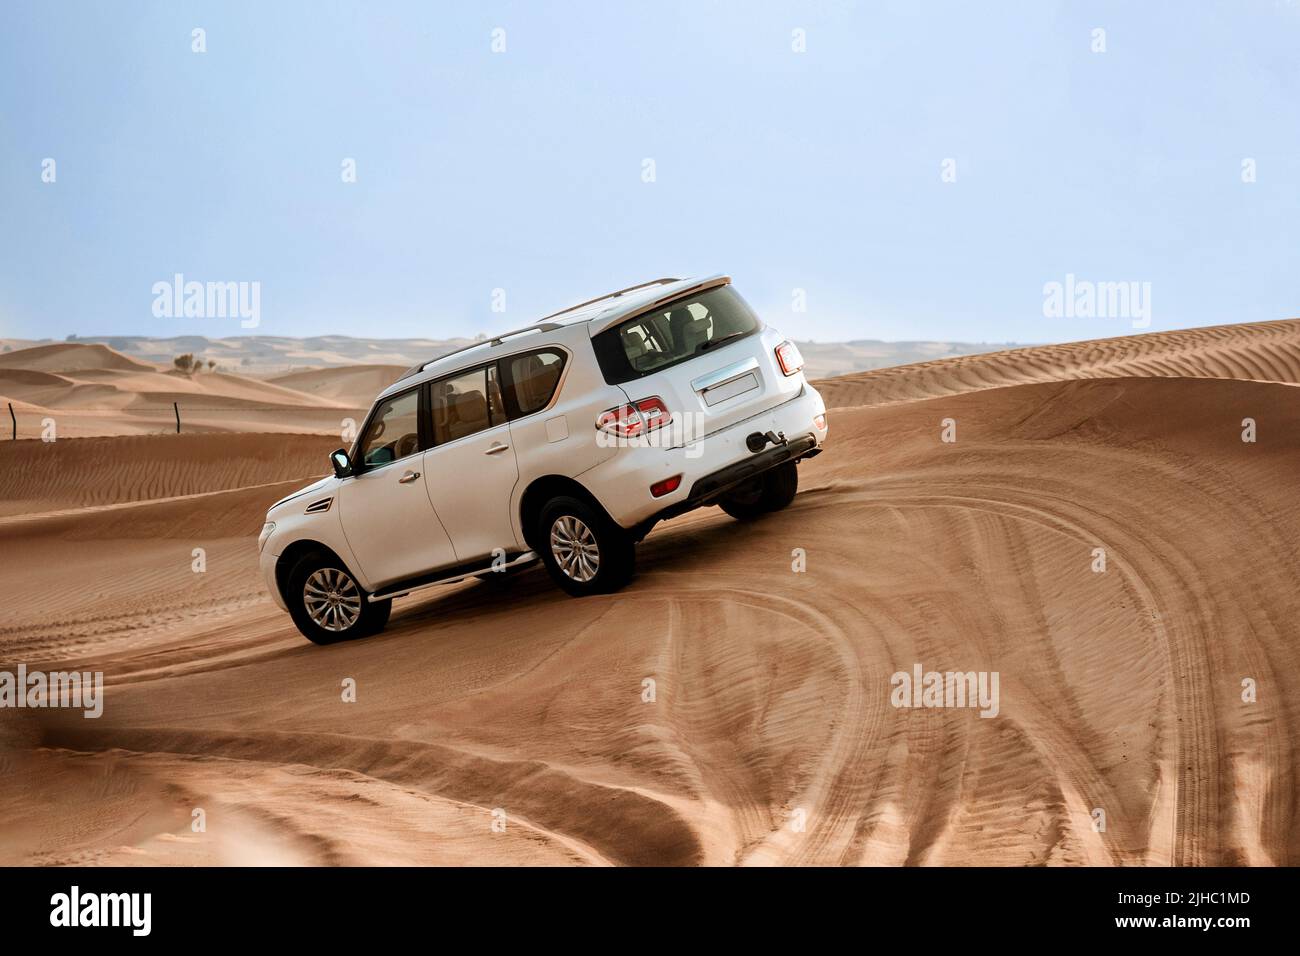 Dubai, United Arab Emirates - 01, July 2021 : The car ride at Arabian Desert over the dunes. A warm day in the desert. Stock Photo